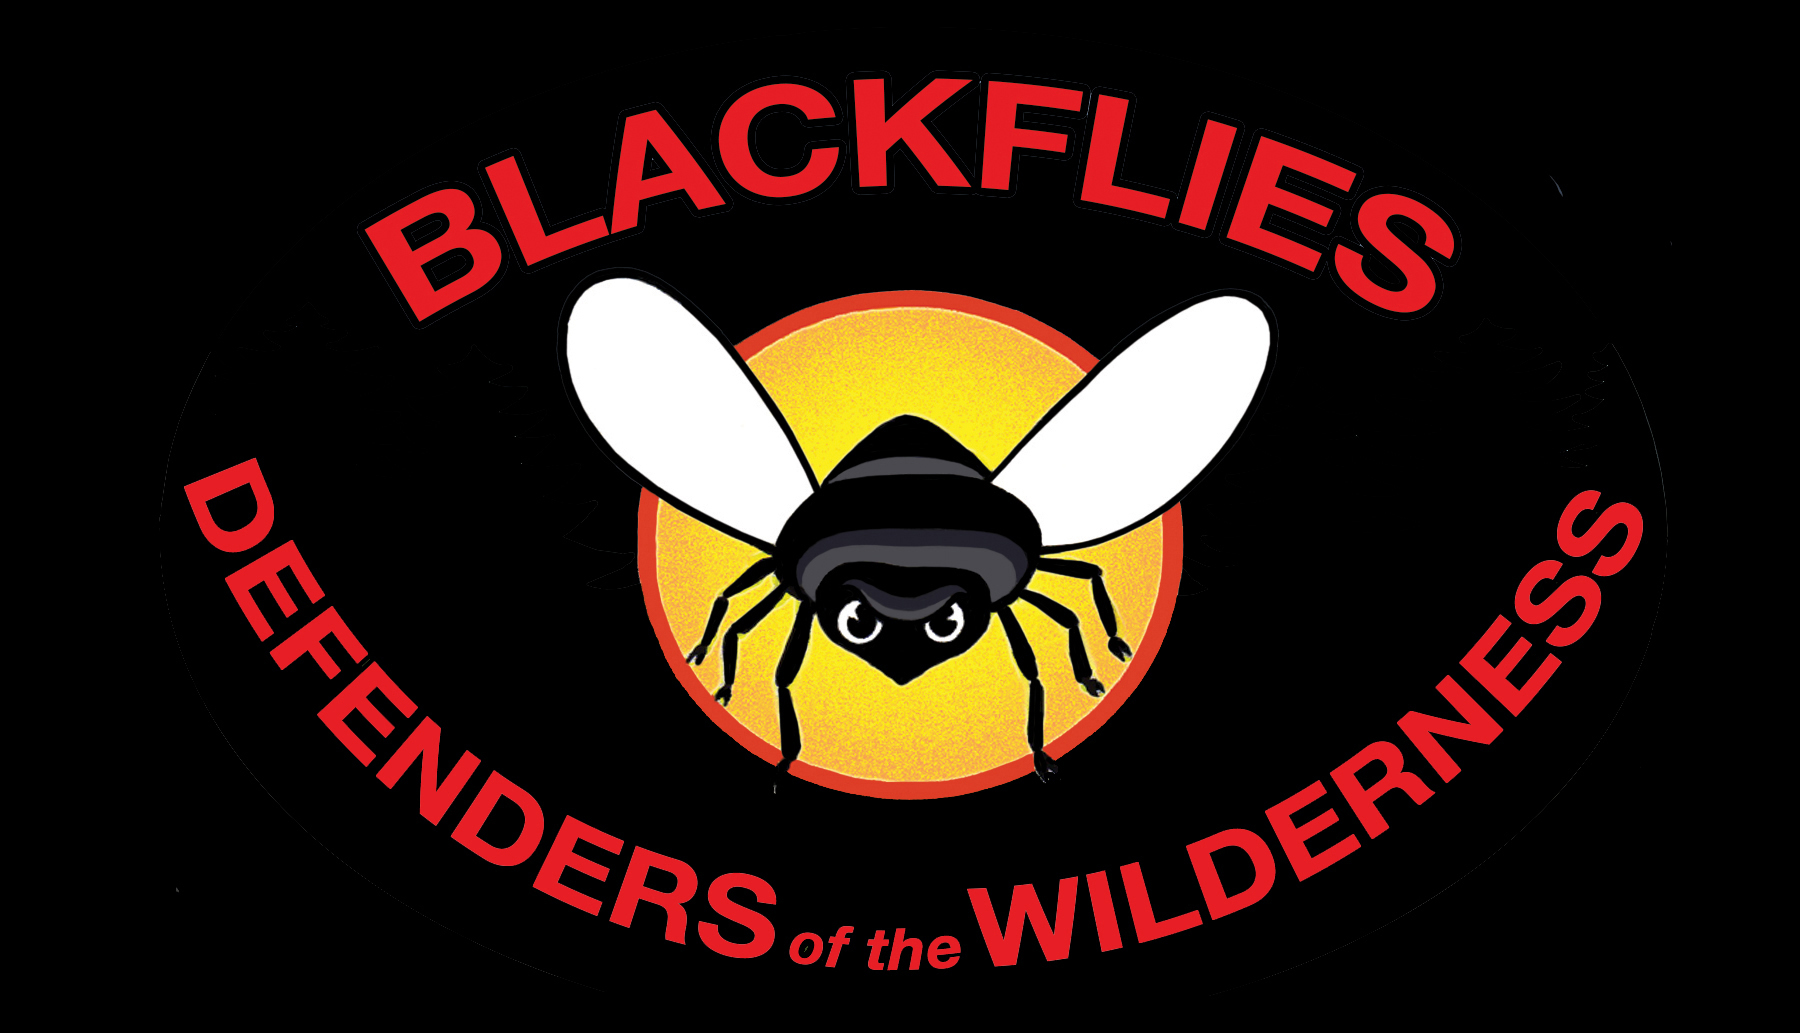 Maine Blackfly Breeders Association logo: a blackfly surrounded by Blackflies_Defenders of the Wilderness